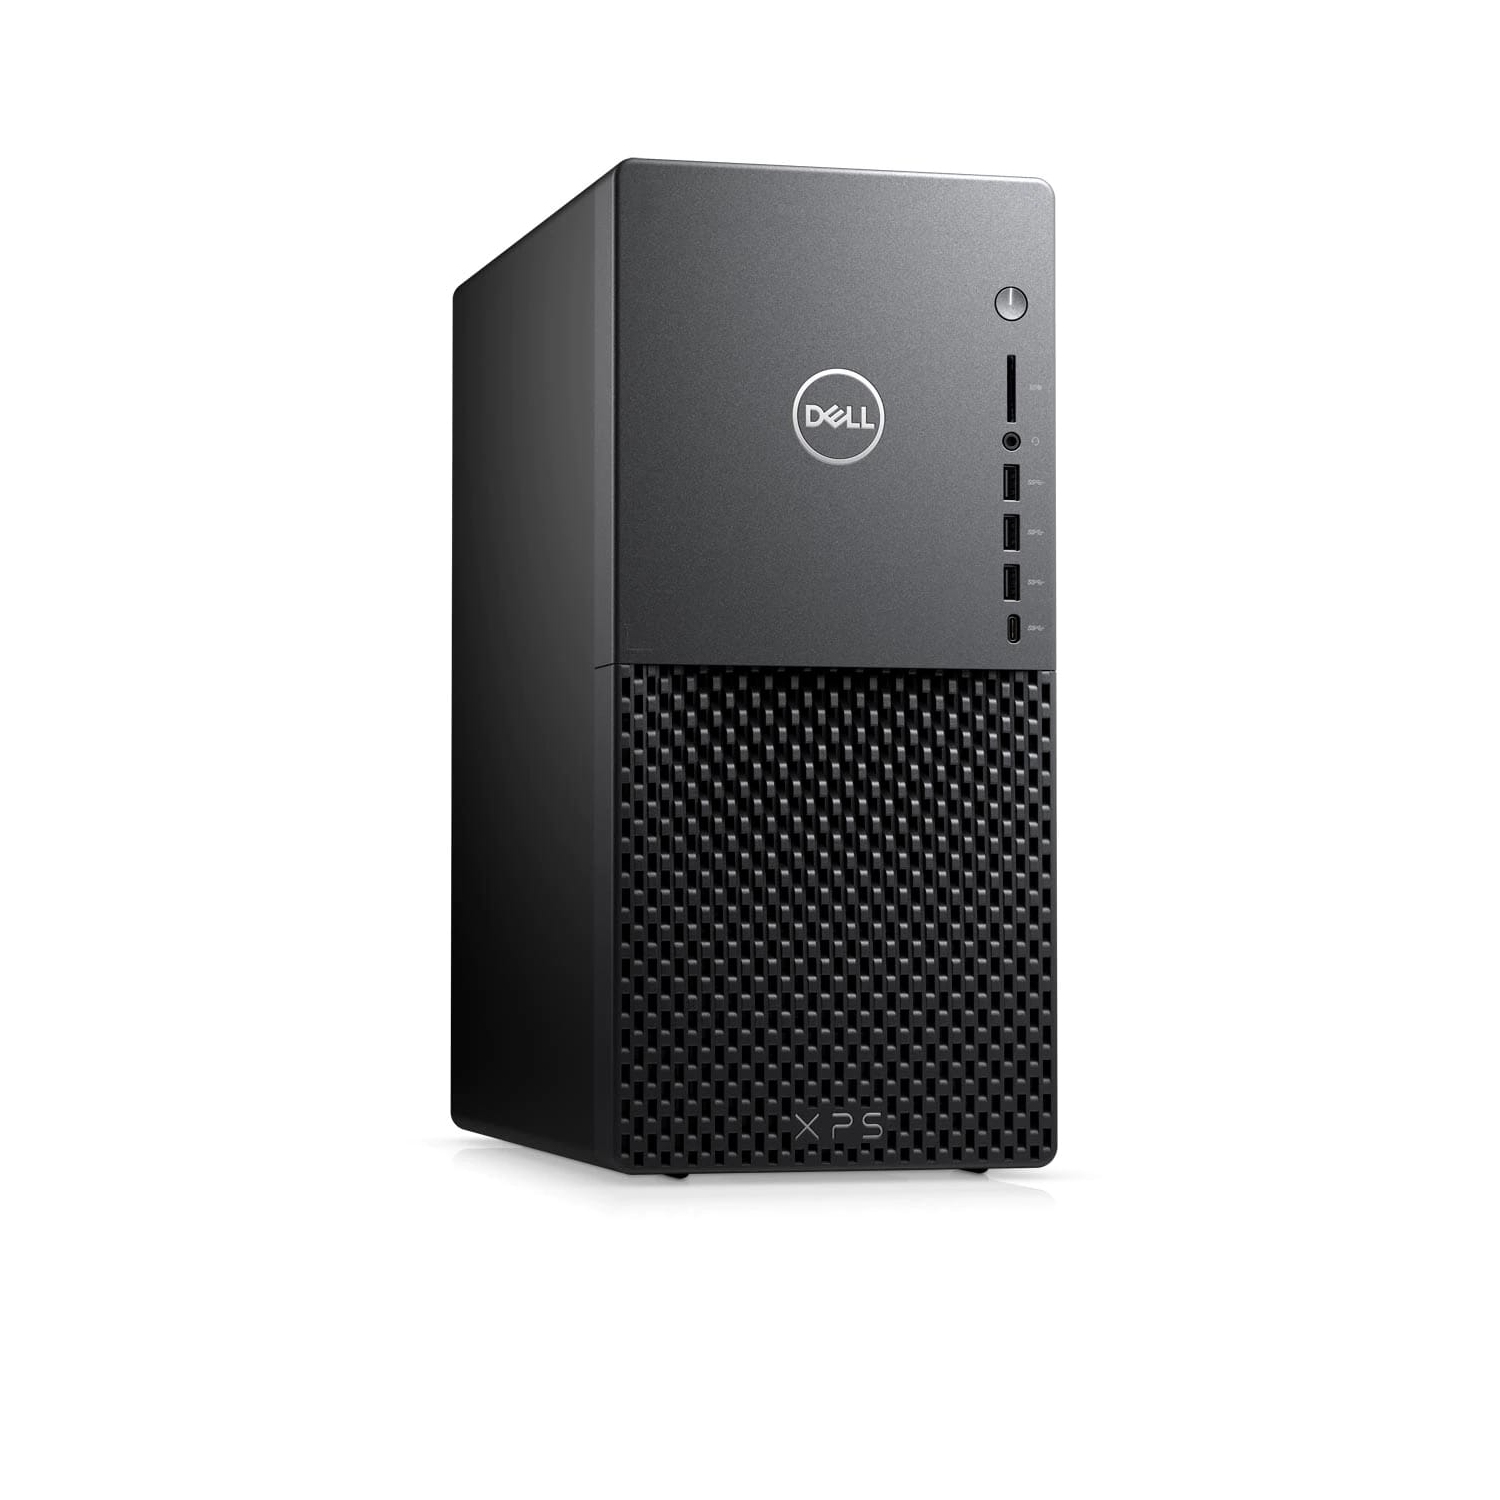 Refurbished (Excellent) - Dell XPS 8940 Desktop (2020) | Core i9 - 1TB SSD + 1TB HDD - 64GB RAM - RTX 3060 | 8 Cores @ 5.3 GHz - 11th Gen CPU Certified Refurbished